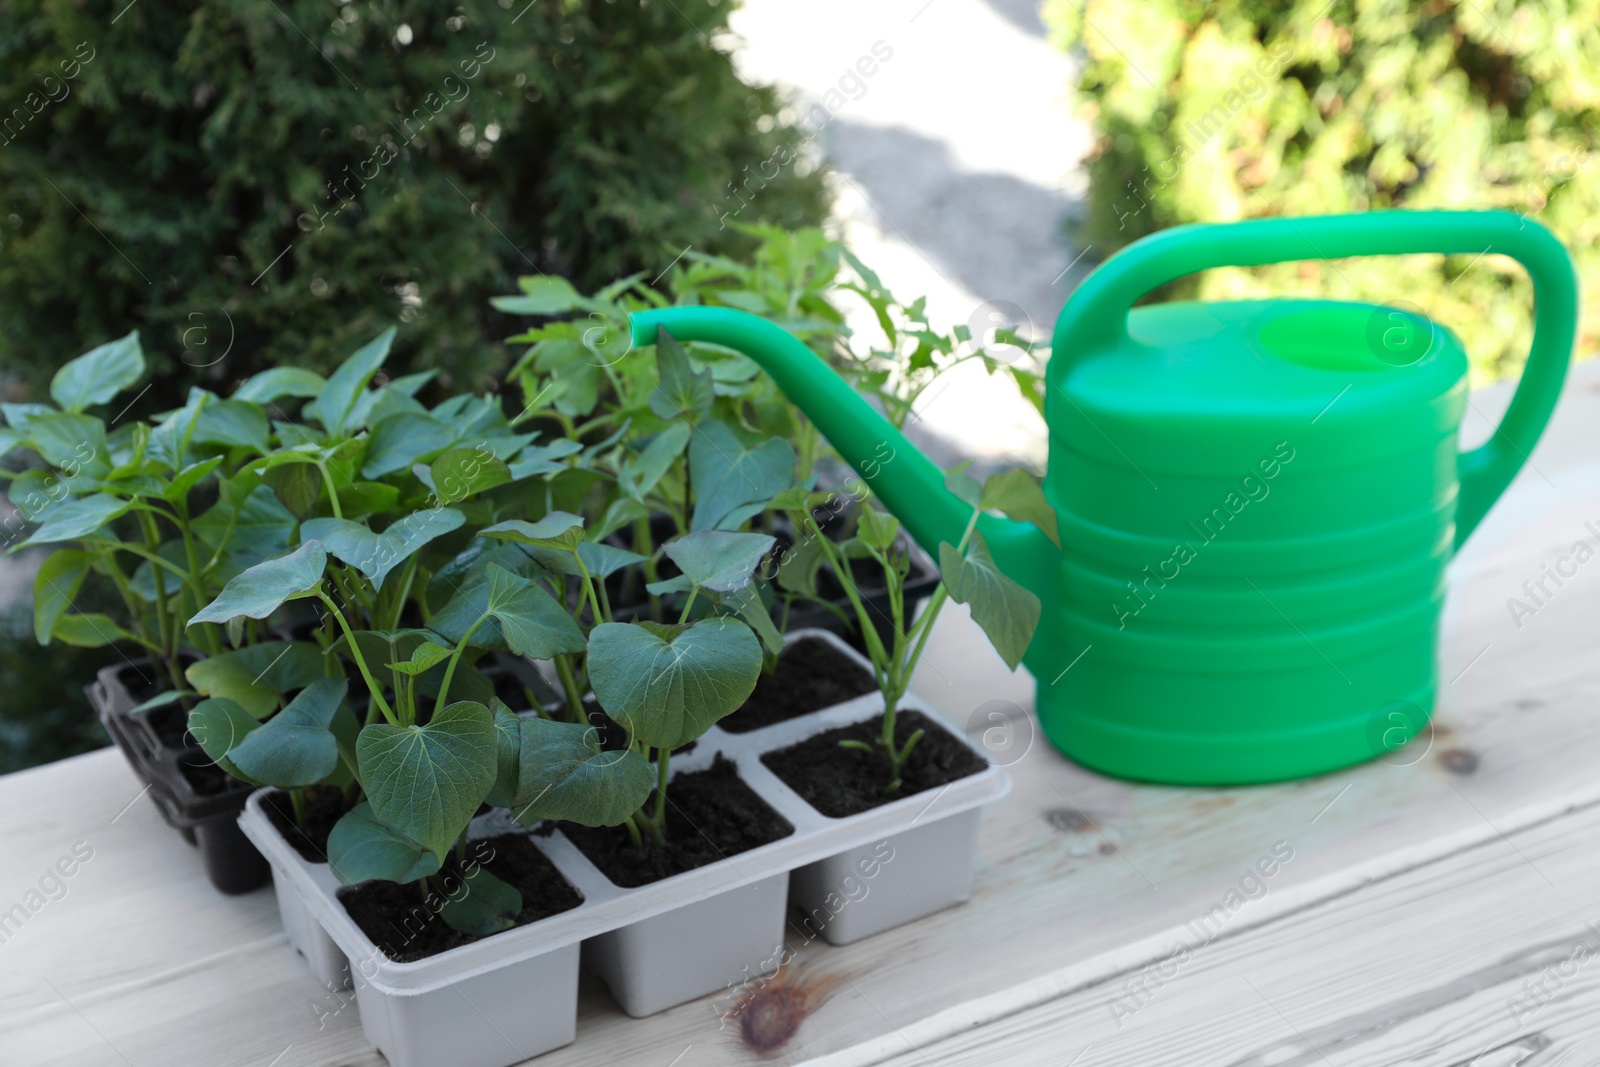 Photo of Seedlings growing in plastic containers with soil and watering can on wooden table outdoors